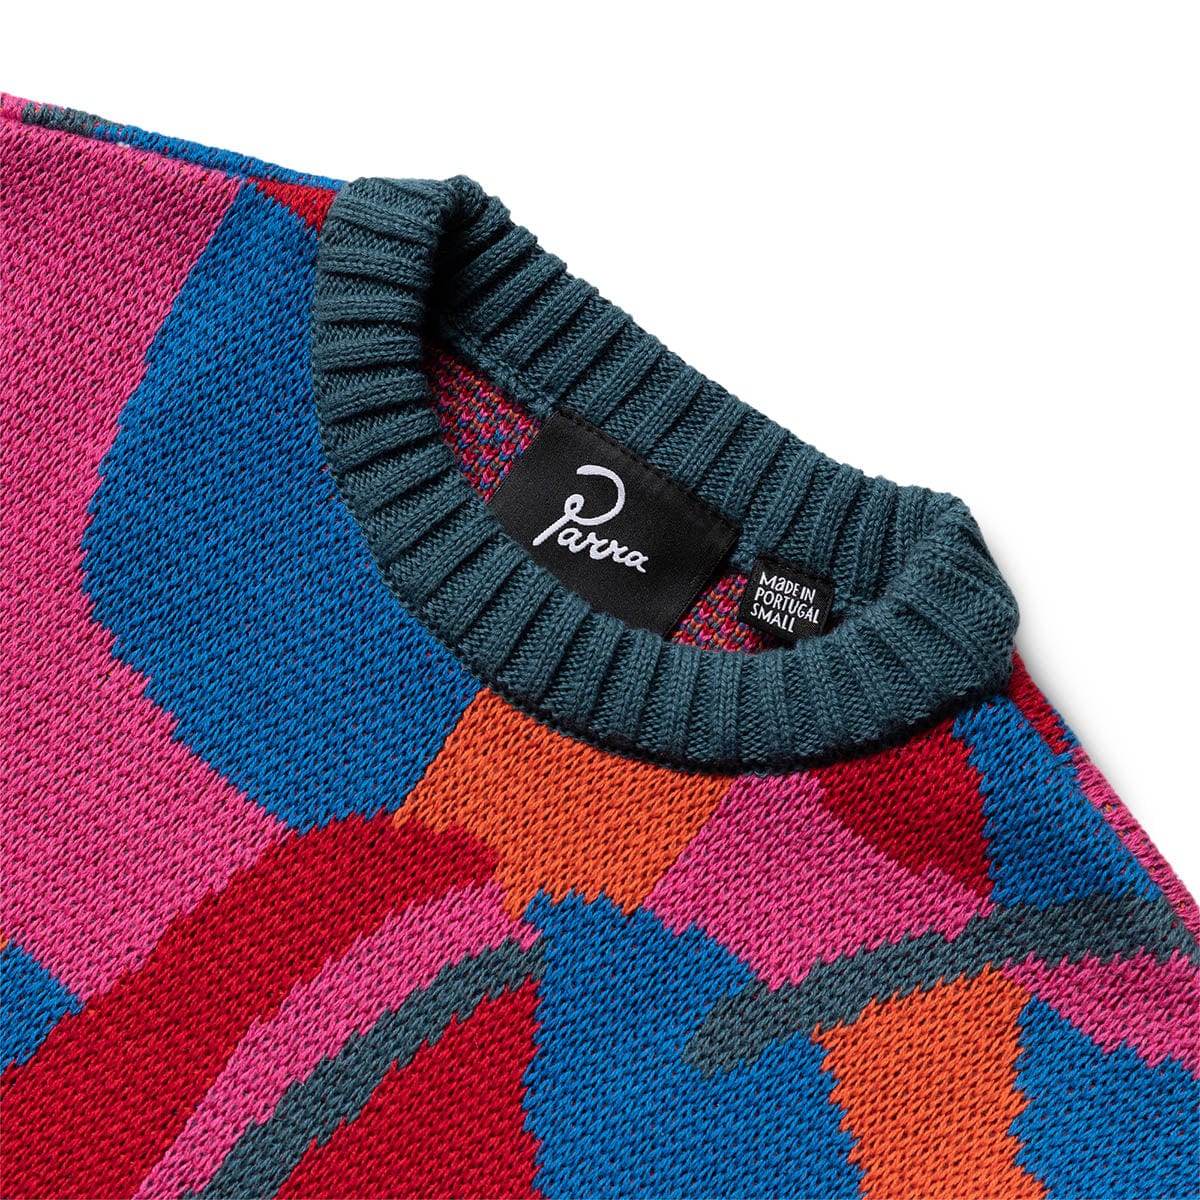 By Parra Knitwear SITTING PEAR PATTERN KNITTED PULLOVER